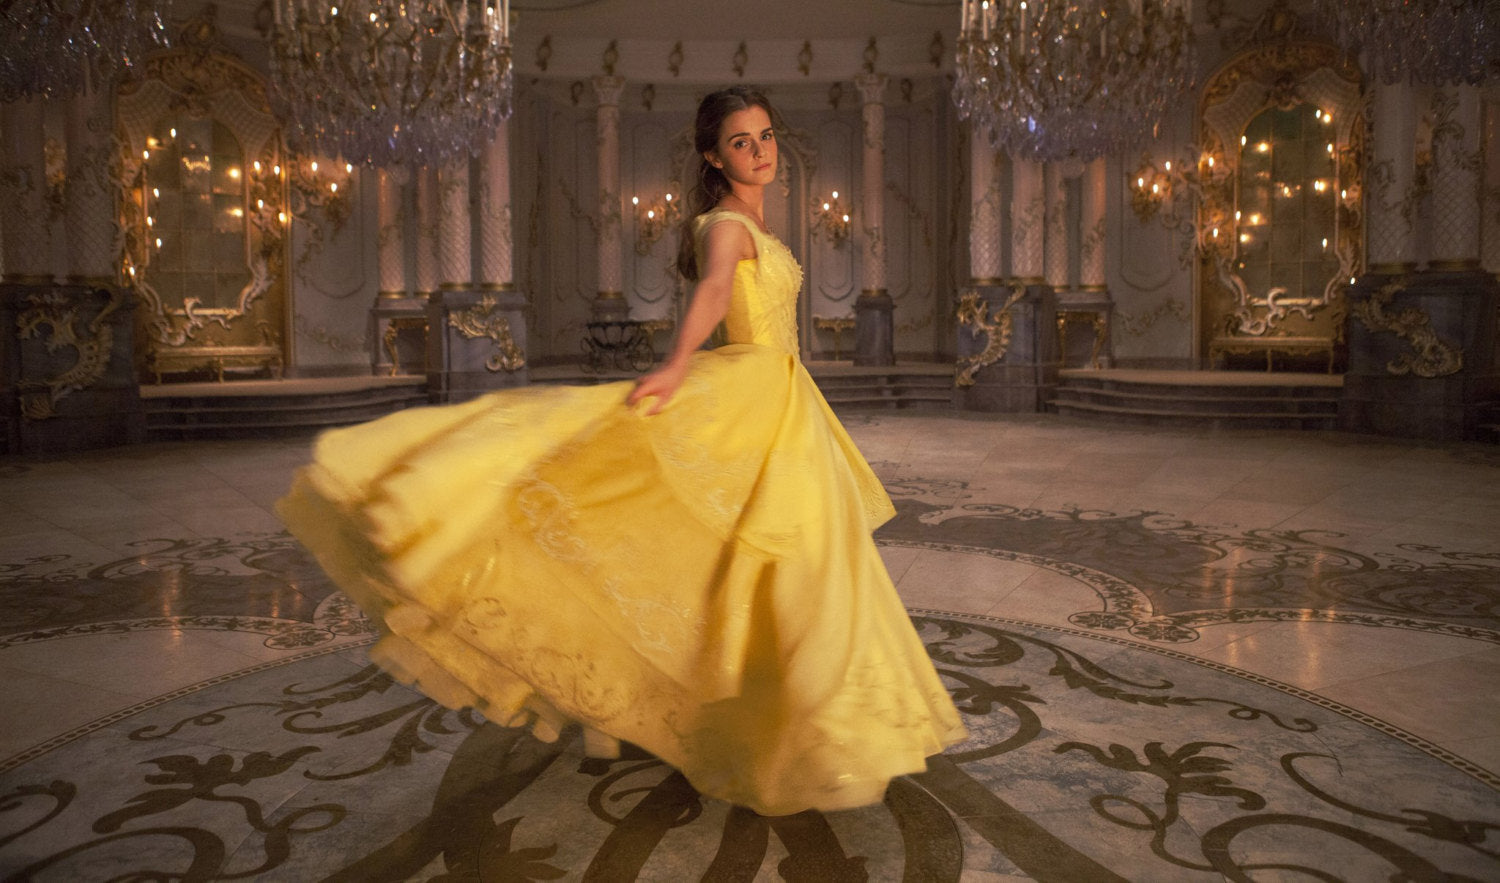 Belle 2017 Beauty and the Beast costume